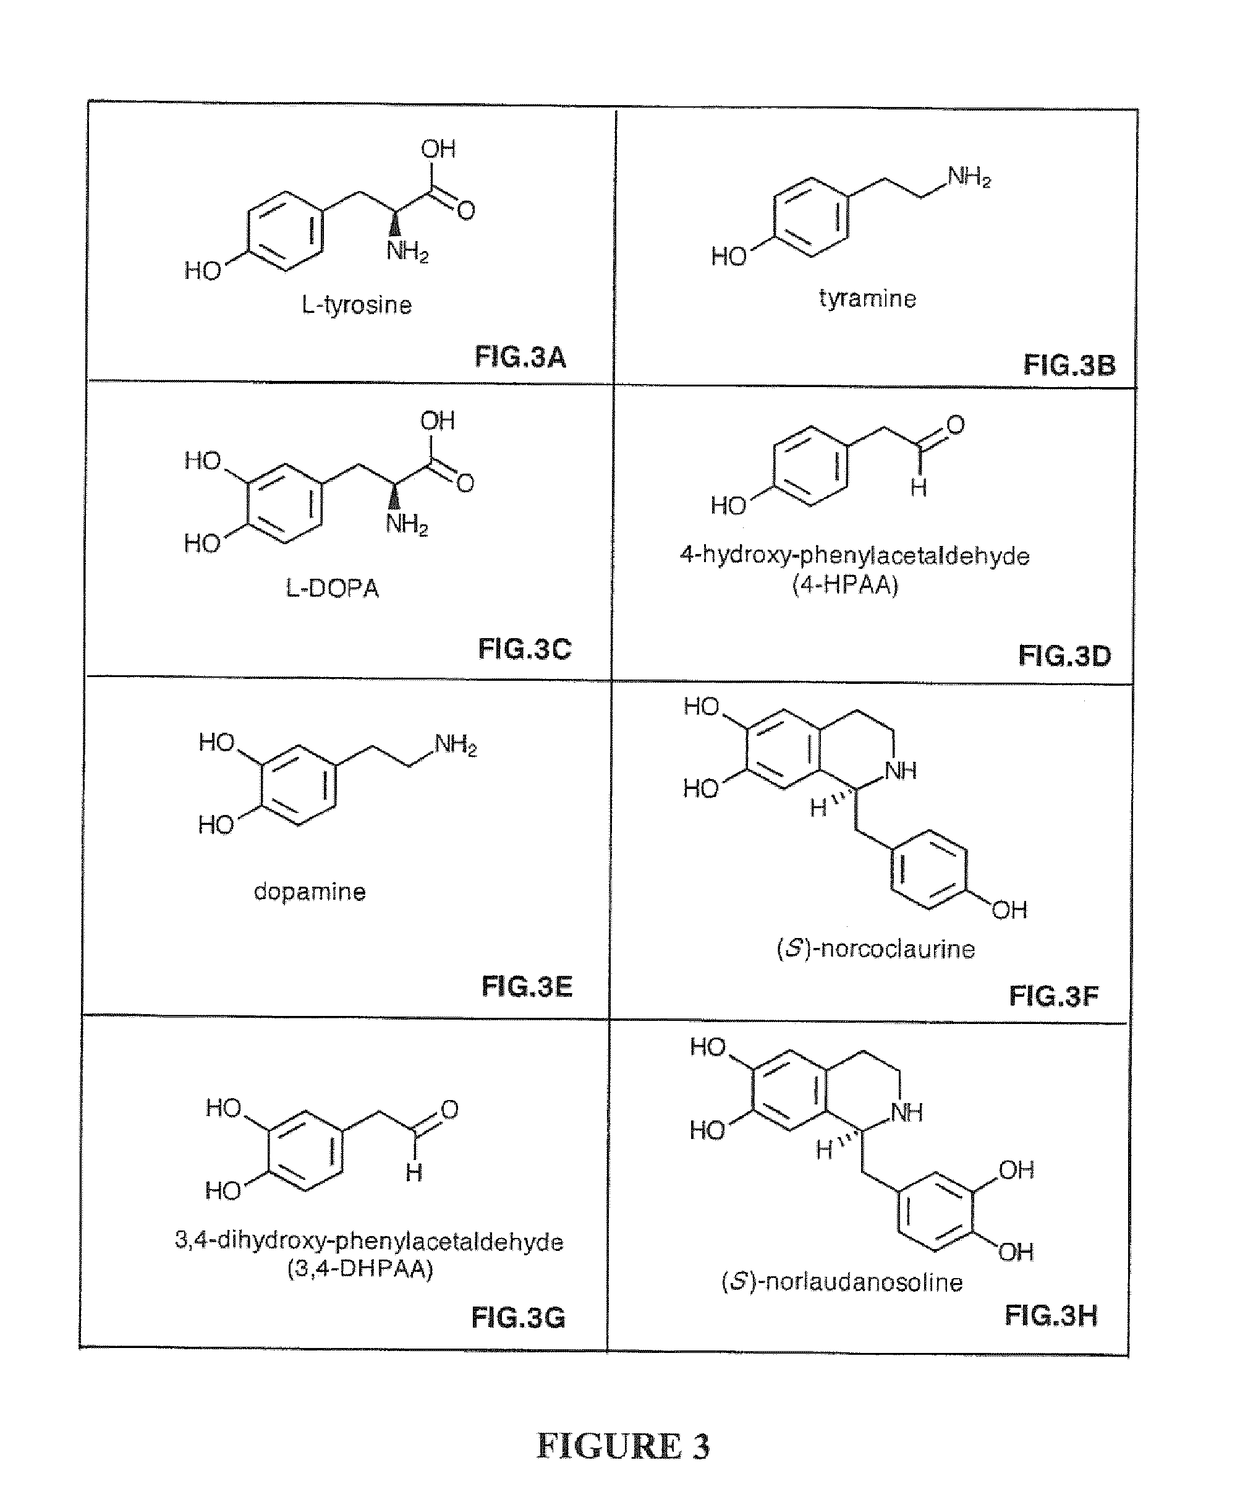 Compositions and Methods For Making (S)-Norcoclaurine and (S)-Norlaudanosoline, and Synthesis Intermediates Thereof